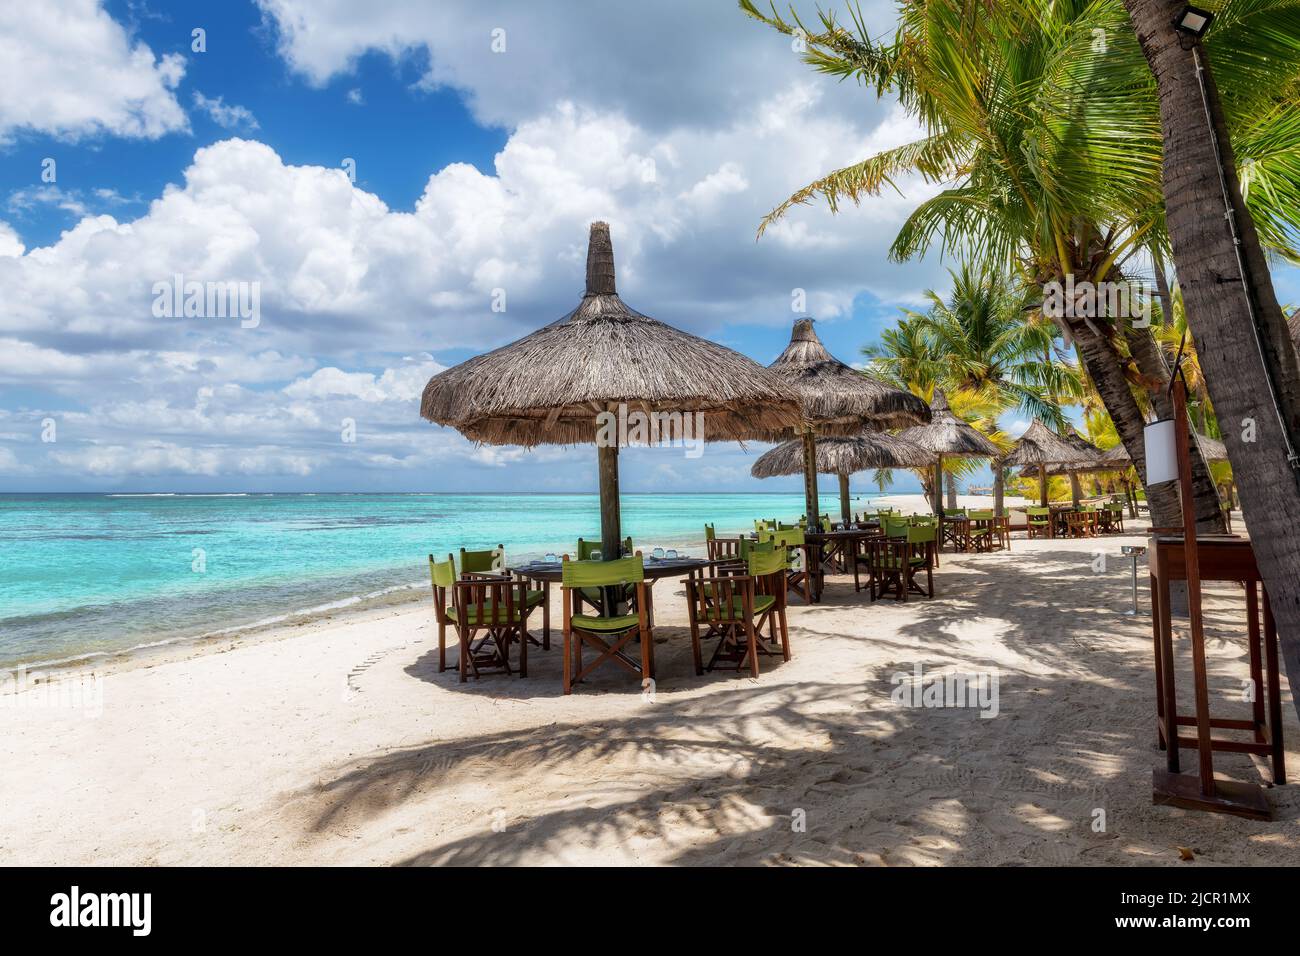 Beach cafe on sandy beach under straw umbrella, palm trees and beautiful sea on exotic tropical island. Stock Photo